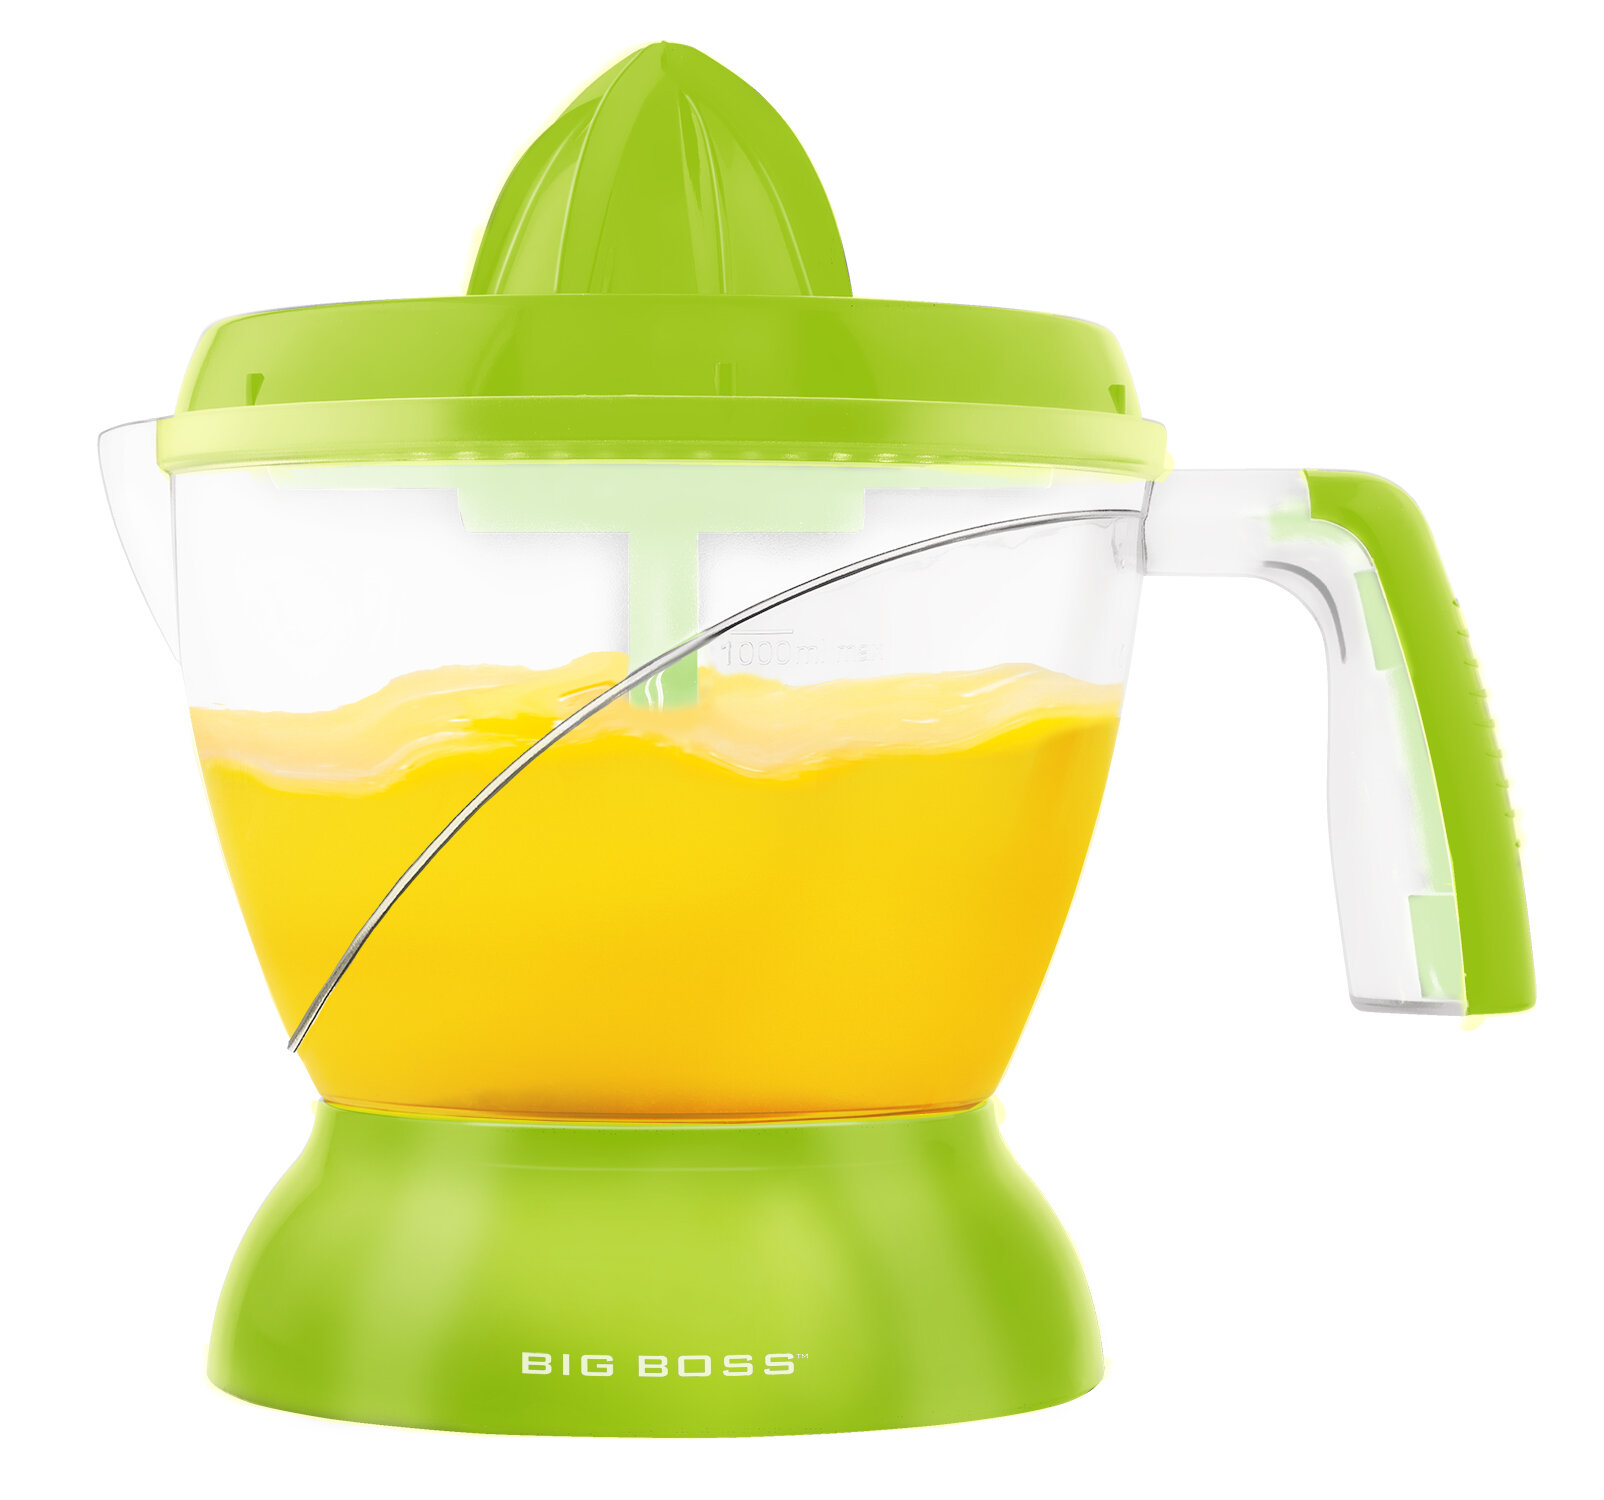 This Arthritis Friendly Citrus Juicer Allows Me To Juice the